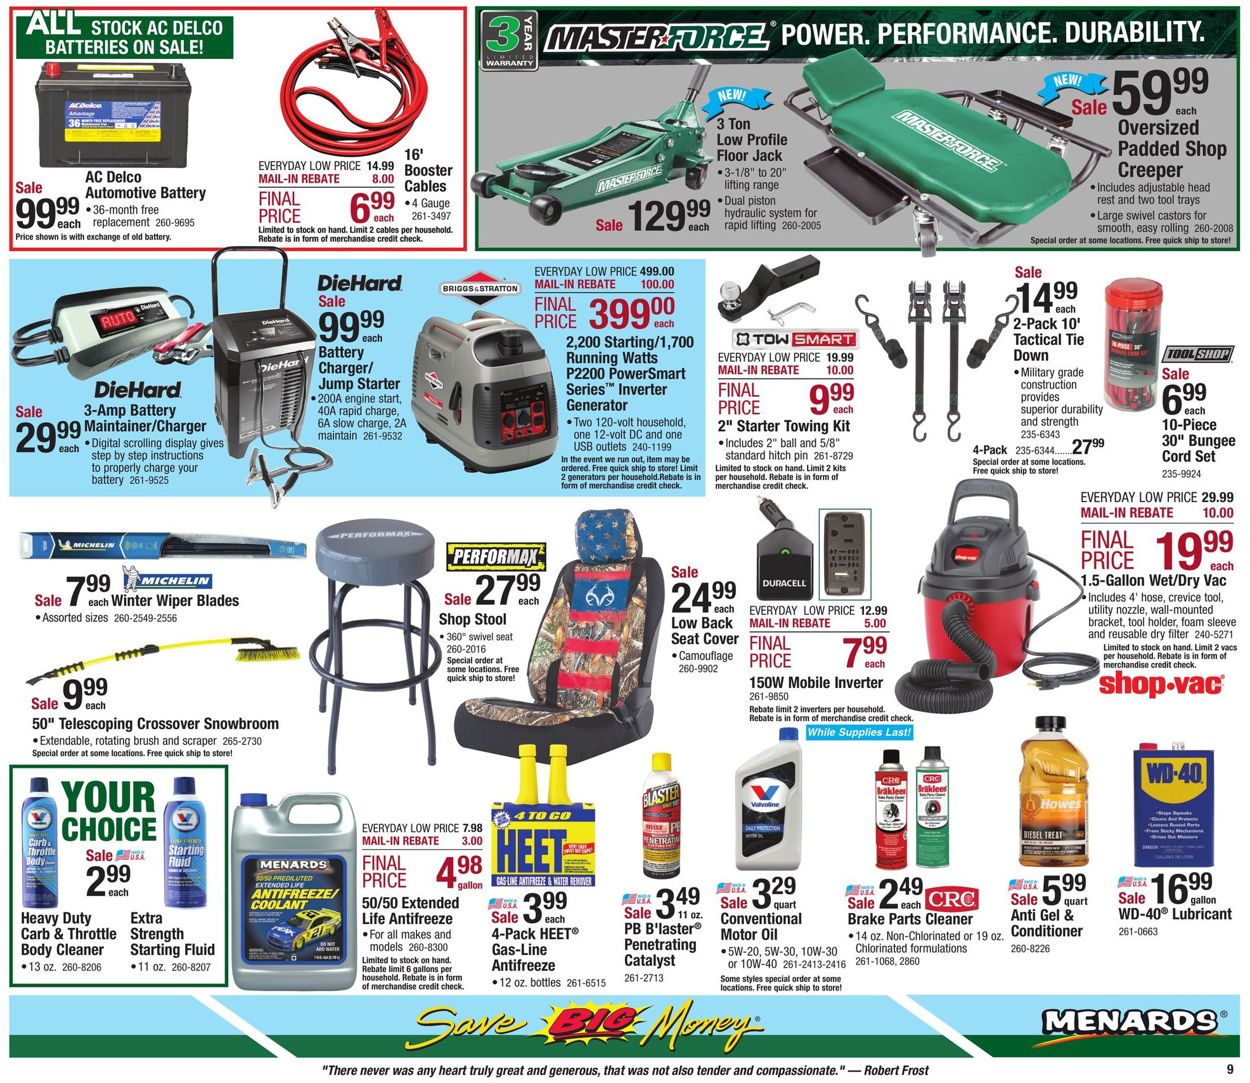 Menards - Christmas Sale Ad 2019 Current weekly ad 12/15 - 12/24/2019 [11] - www.bagsaleusa.com/product-category/onthego-bag/